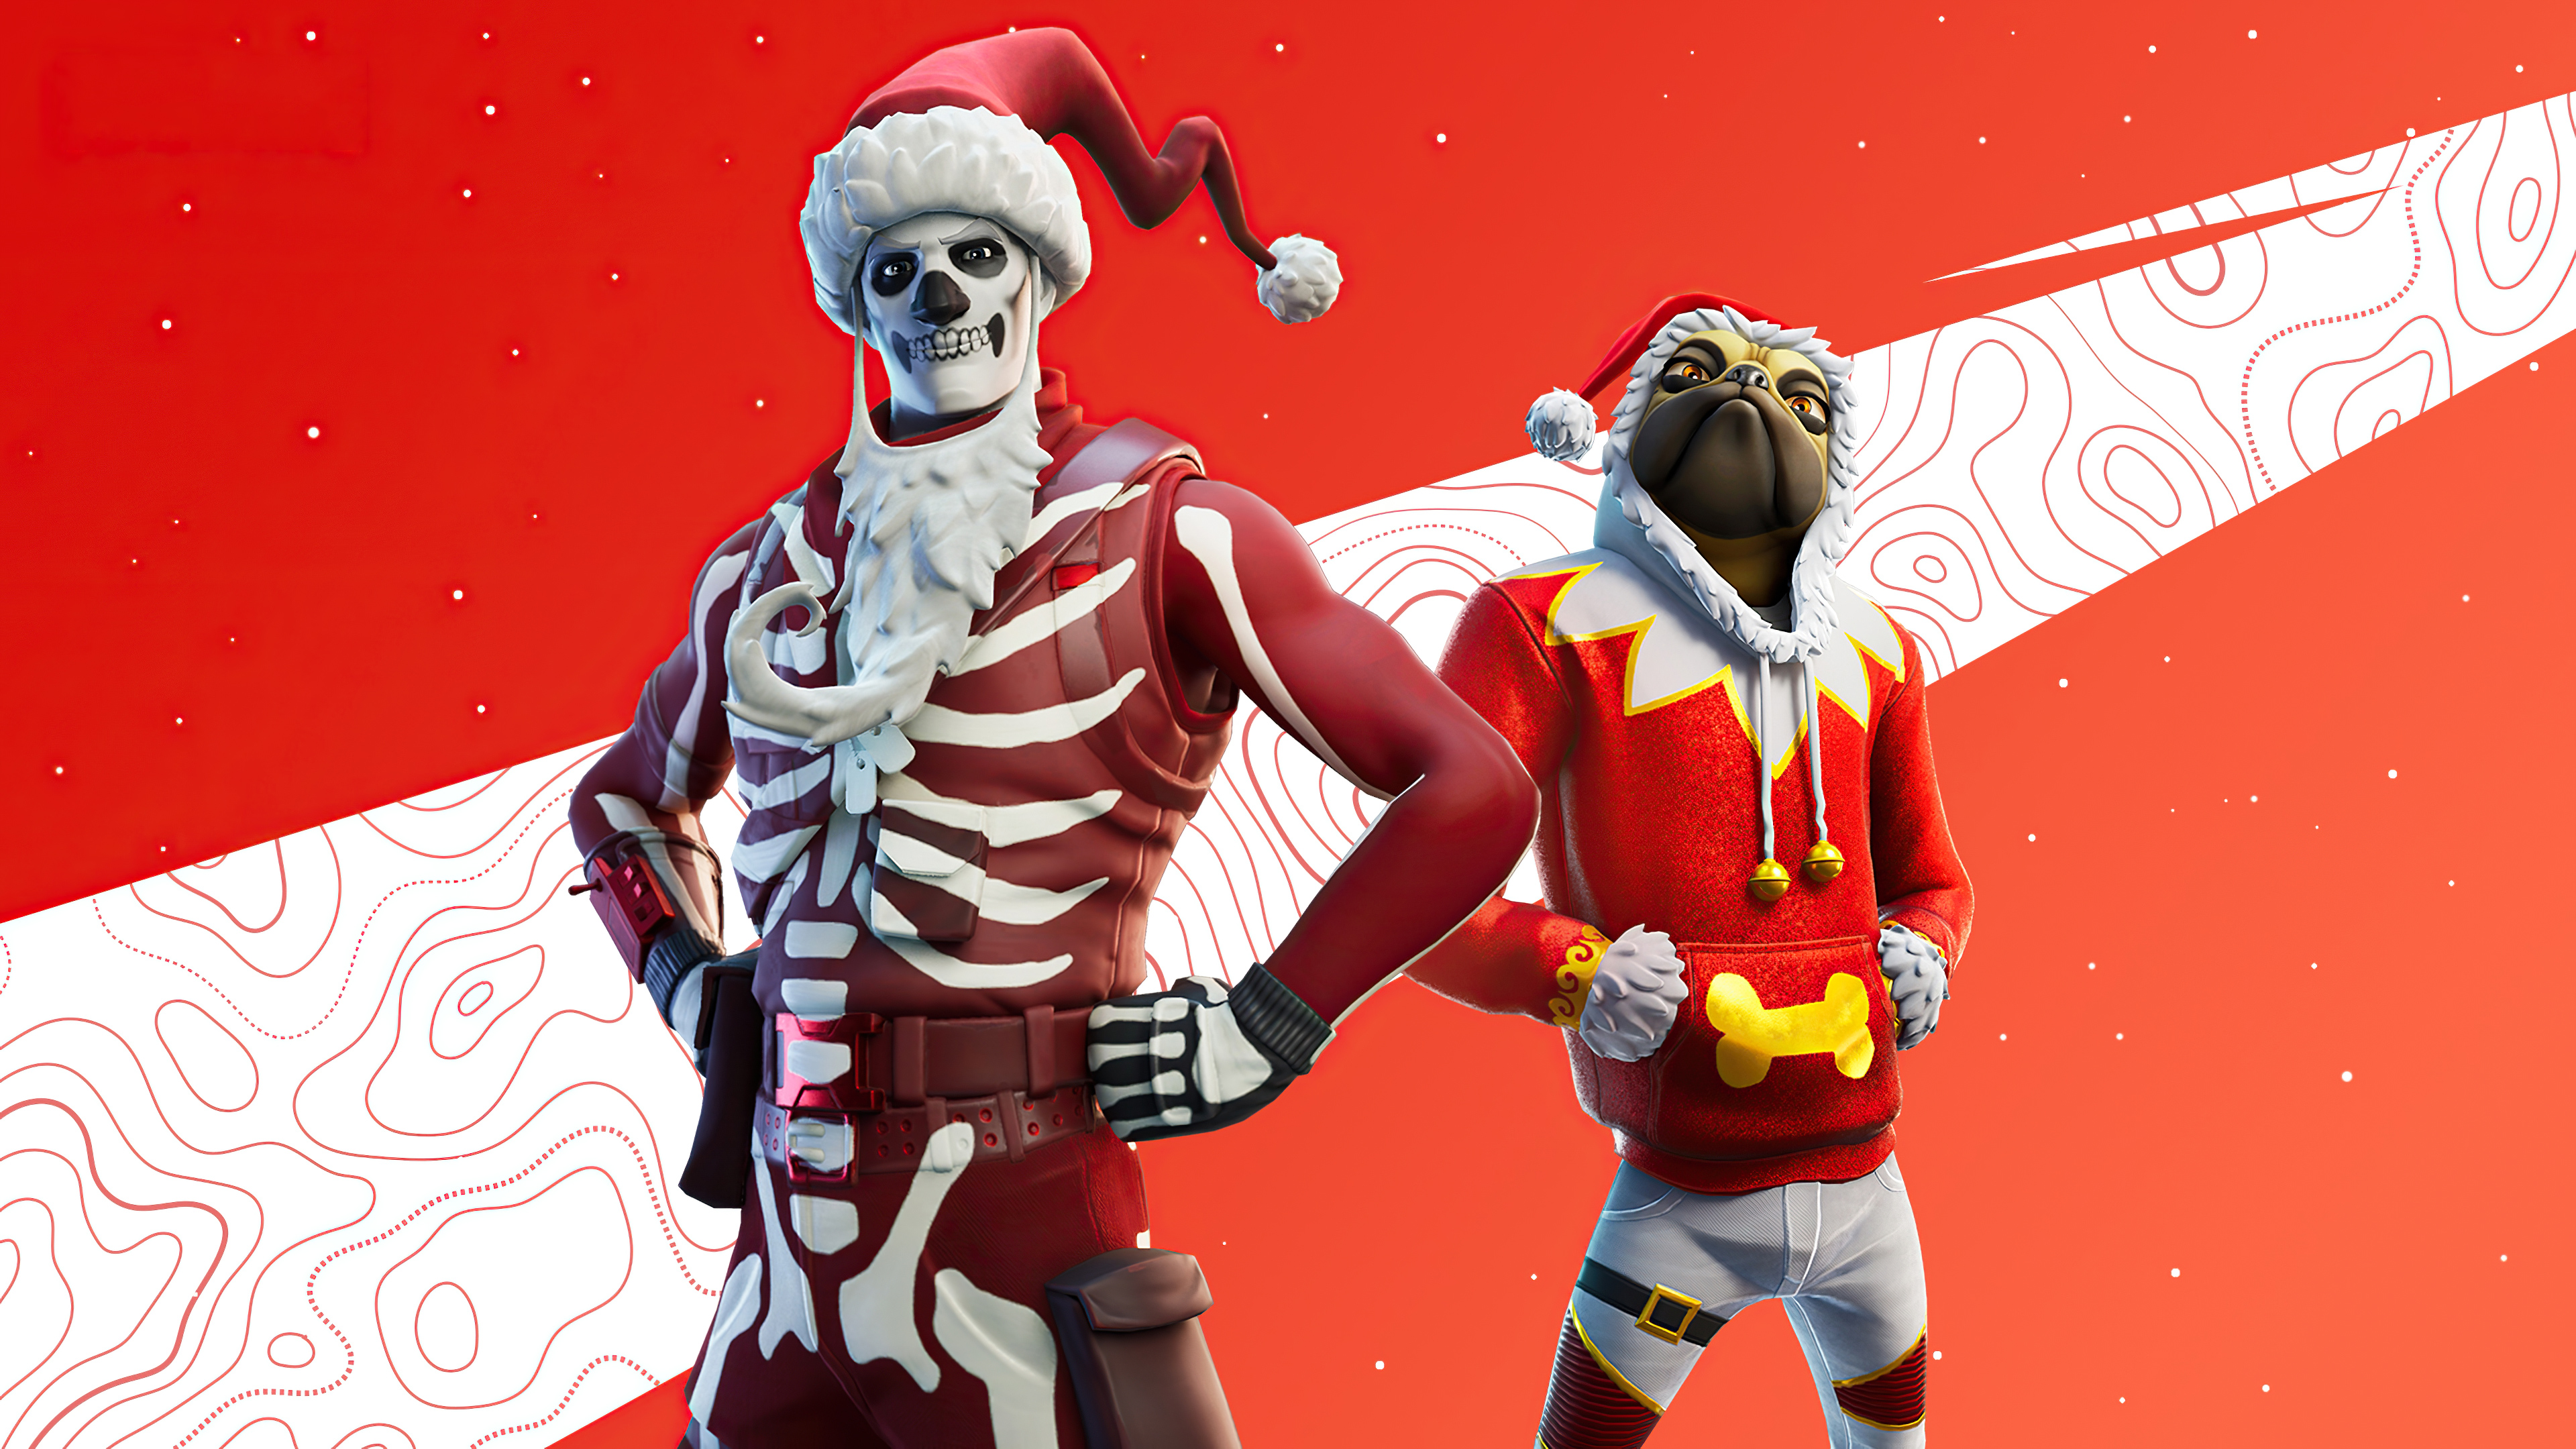 Wallpapers Fortnite games new year on the desktop